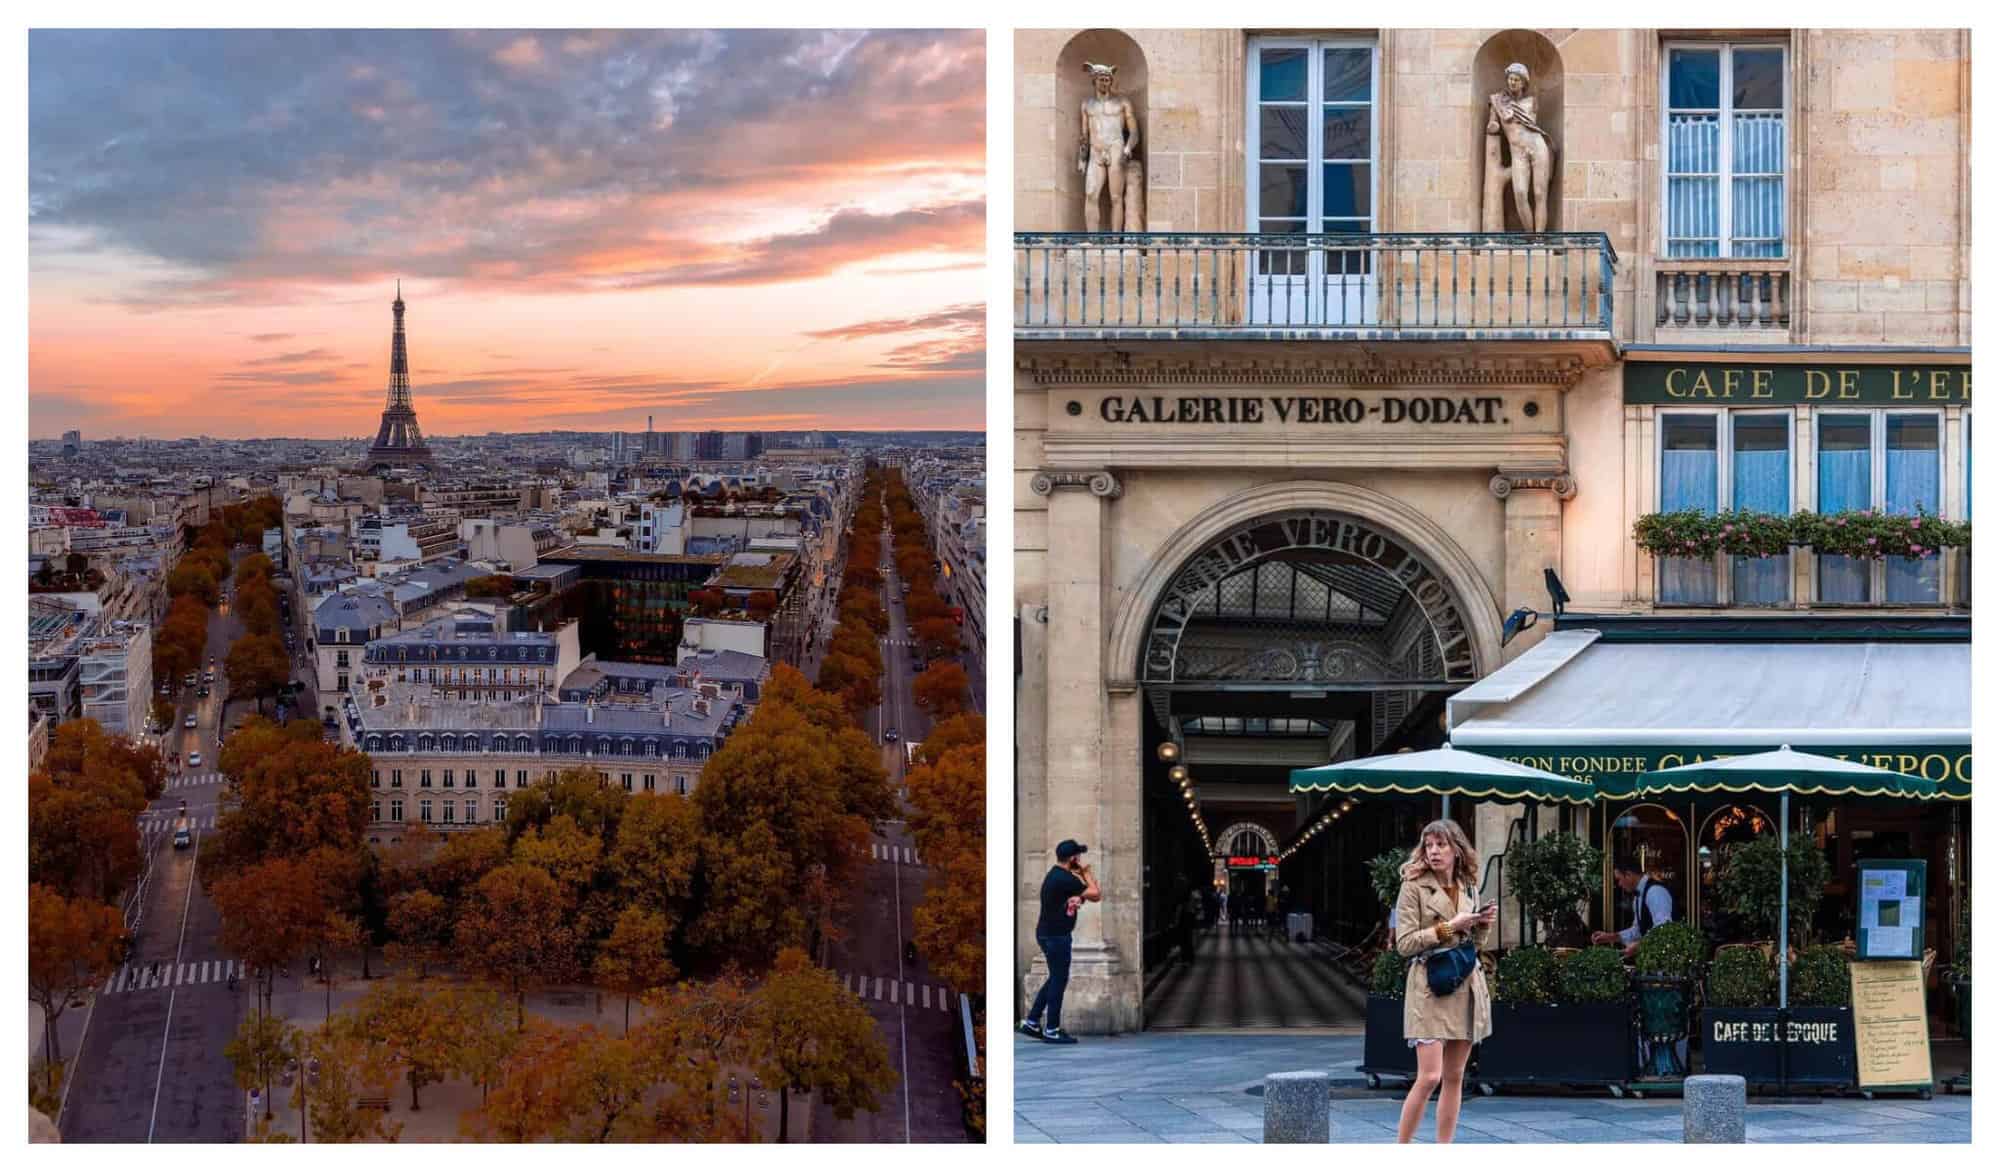 Left: Parisian streets lined with brown colored trees during sunset. Right: A woman in a beige trench coat stands in front of a bar with green parasols.